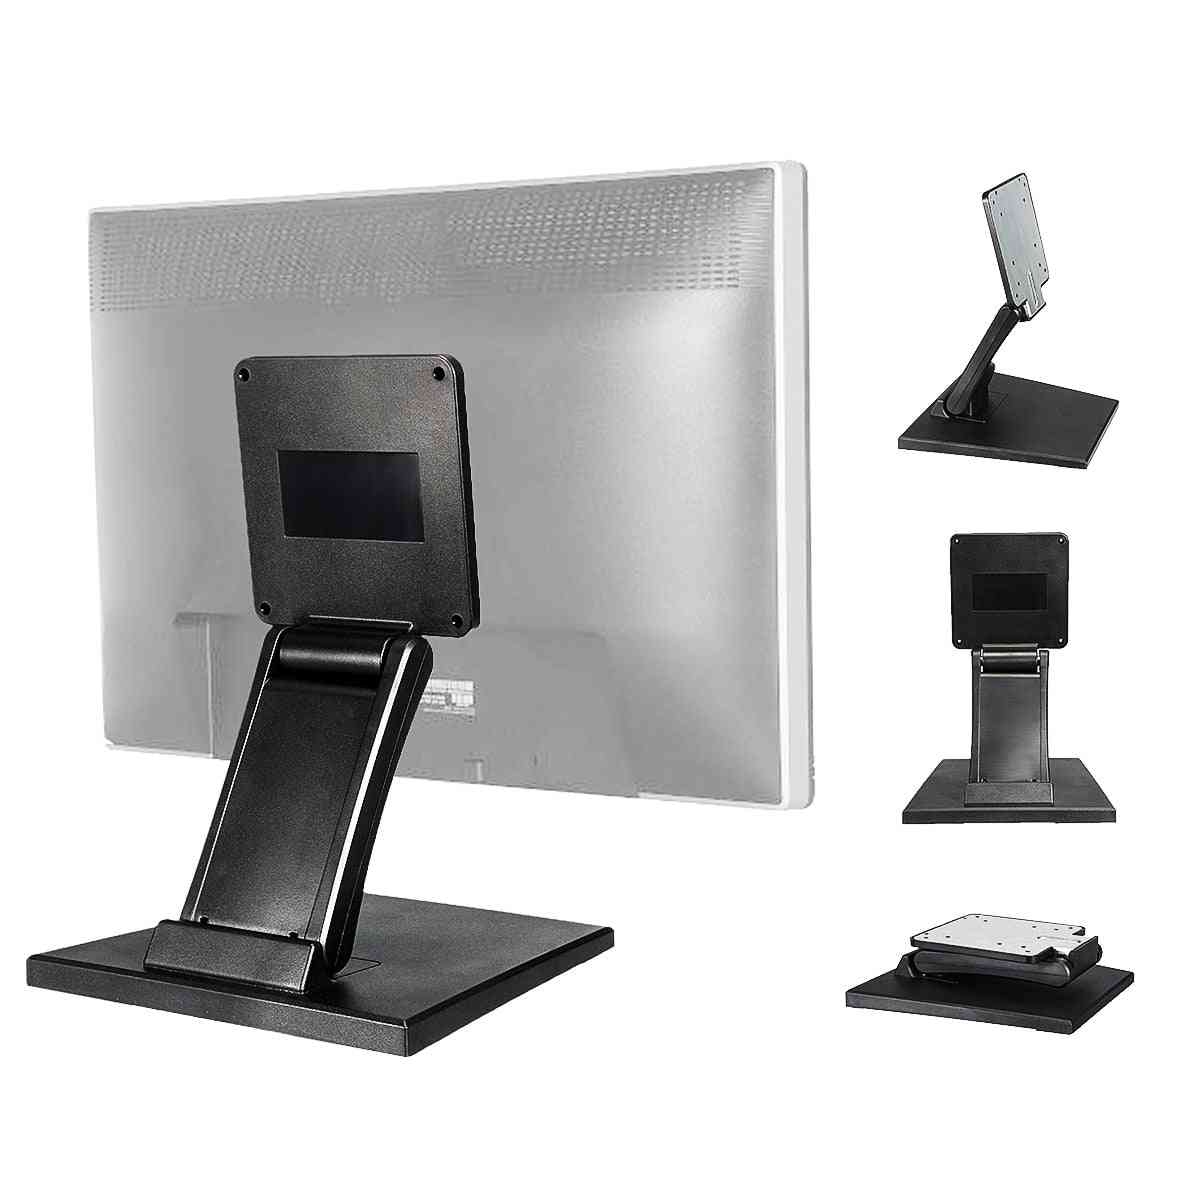 Desktop Monitor Holder Lcd Led Folding Display Touch Screen Stand Mount Bracket